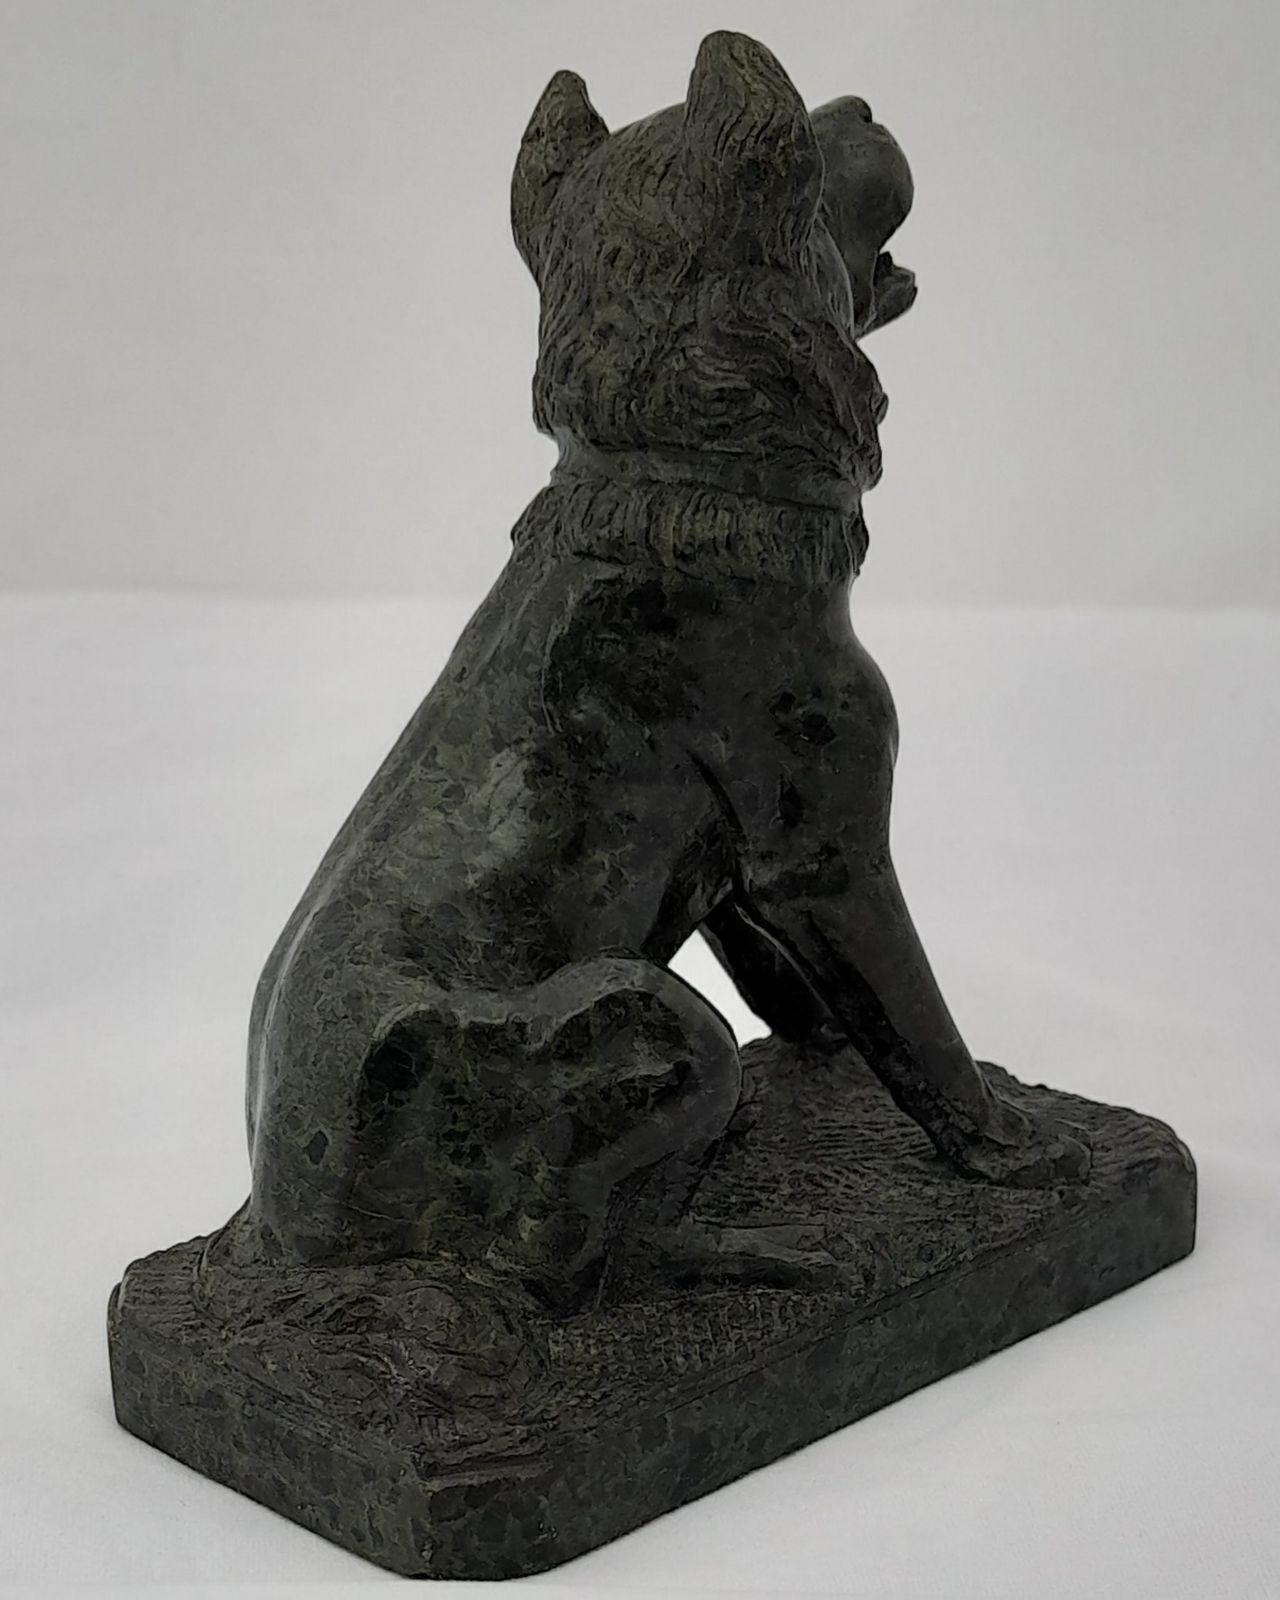 An antique Grand Tour memento serpentine marble sculpture or statue of Jenning's  Dog, Duncombe's dog, Molossian Dog or Hound of Albiciades 19th century small scale model circa 1880  10cm L 5.7 cm W  10.8 cm H  0.387 kg